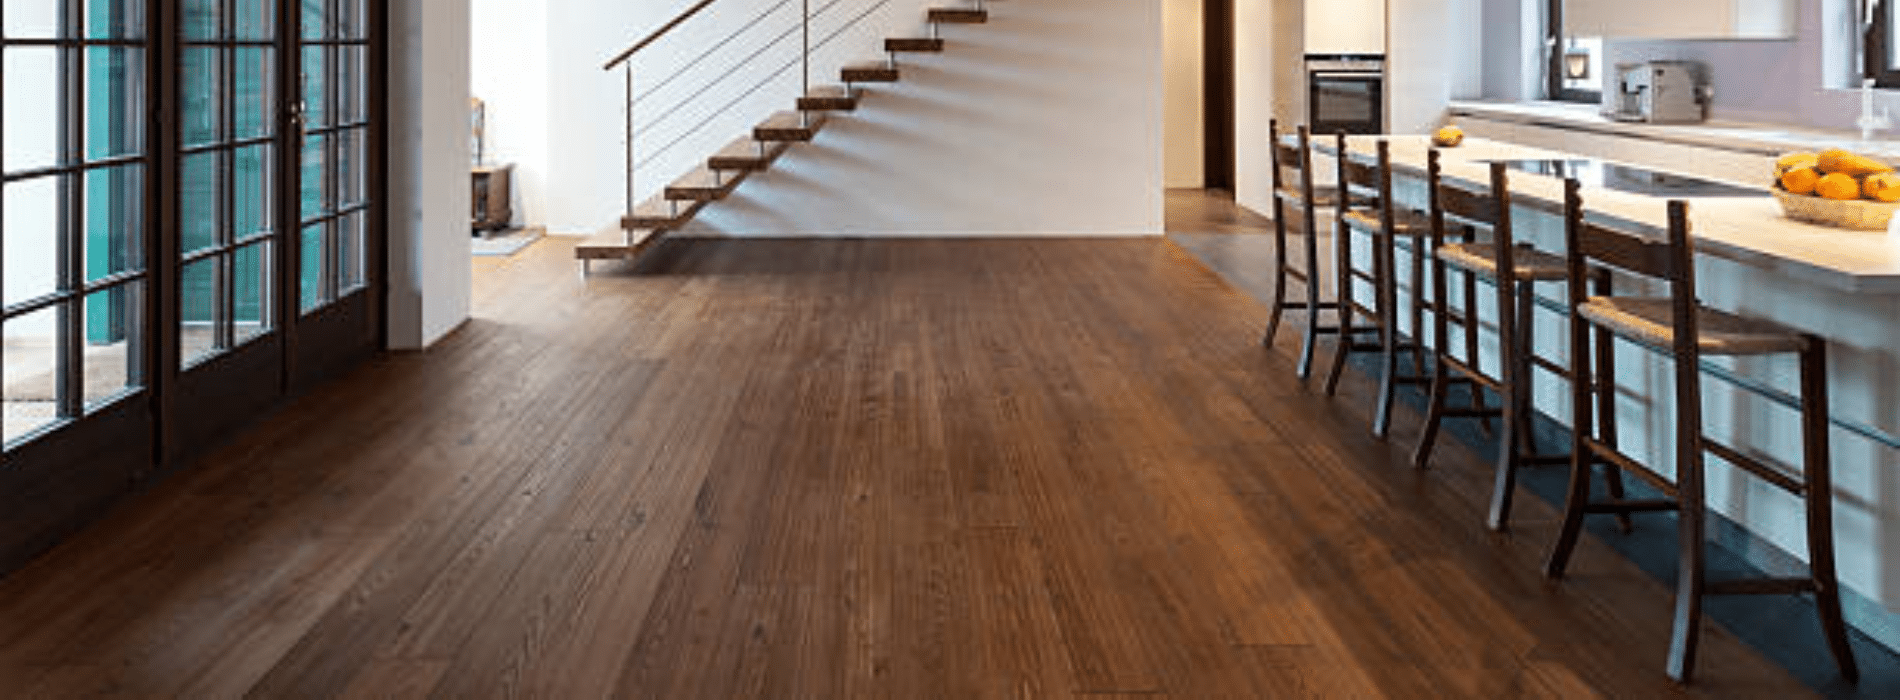 Revitalized engineered oak floors by Mr Sander® in Hatfield, AL10. Meticulously restored to showcase the natural beauty. Mid-oak stain adds warmth and charm, while Junckers Strong satin finish guarantees long-lasting durability.